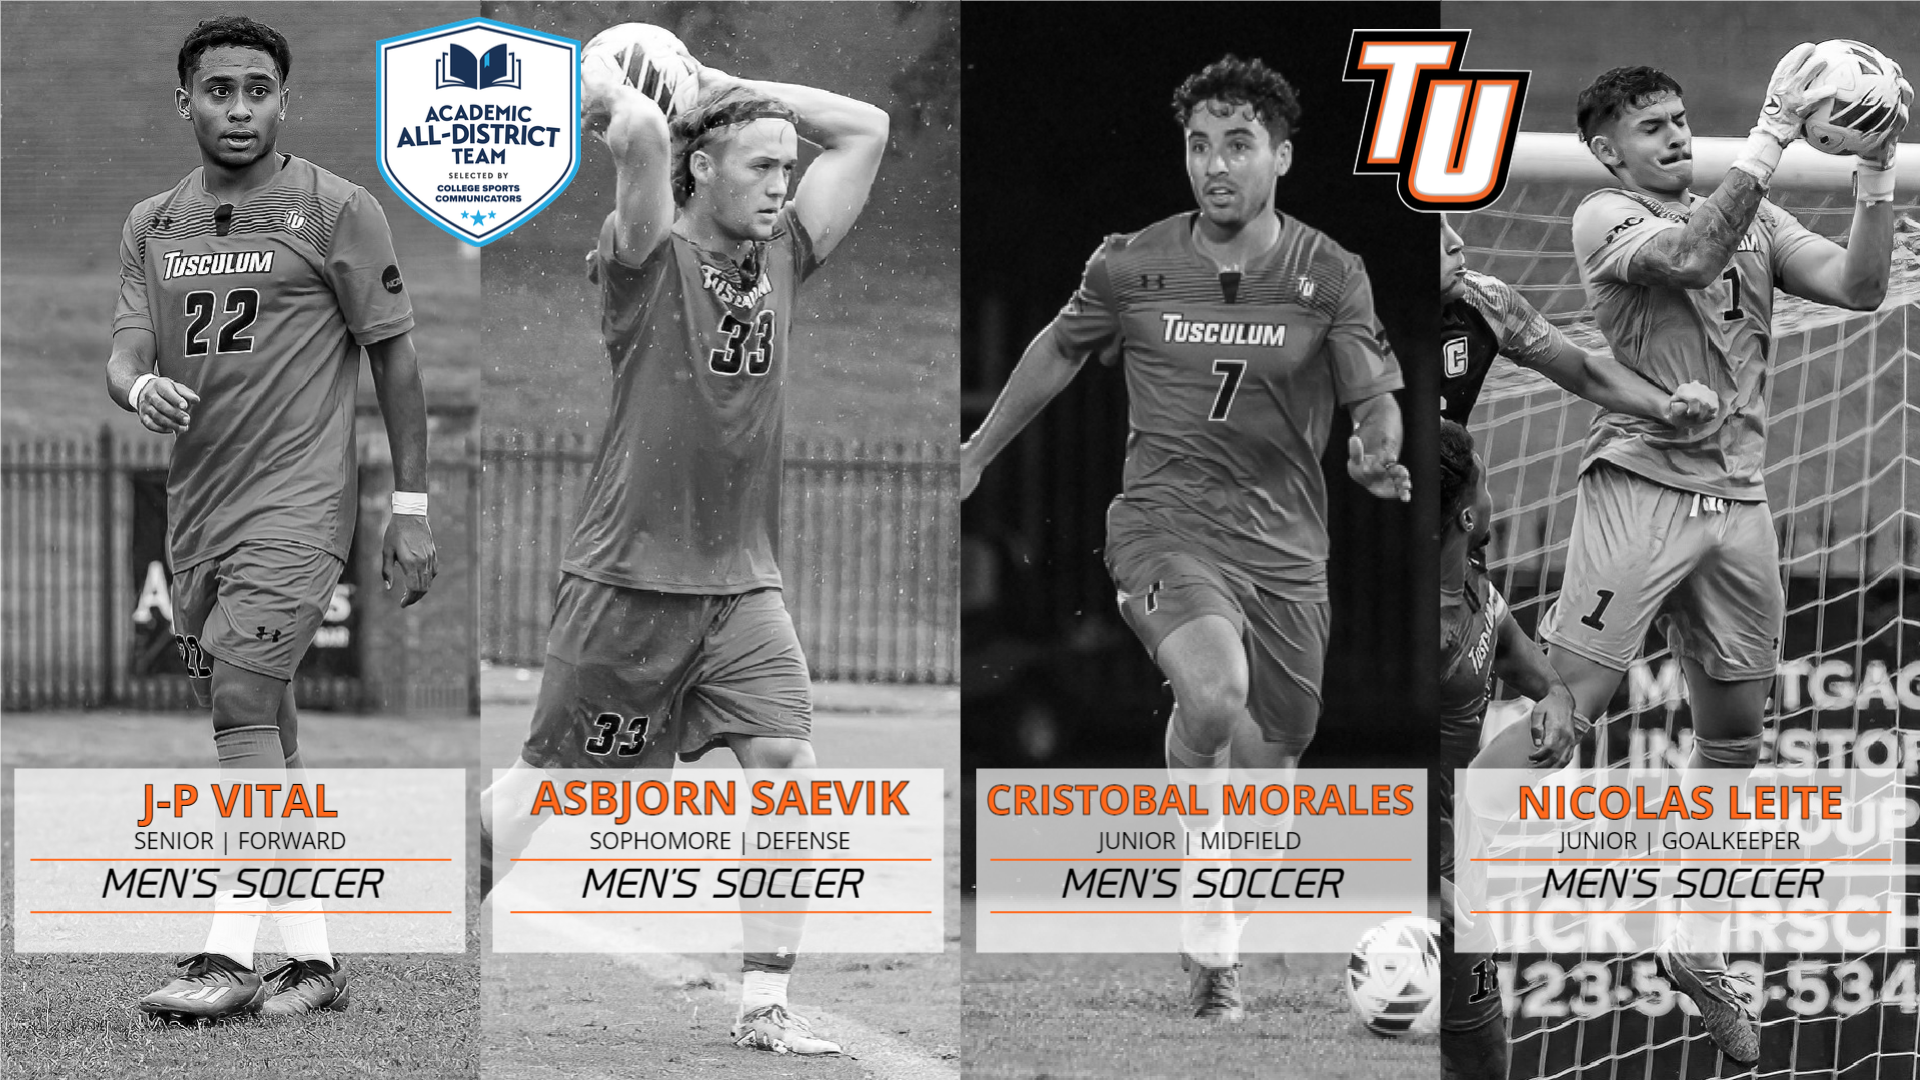 Four Pioneers named to CSC Academic All-District Men's Soccer Team